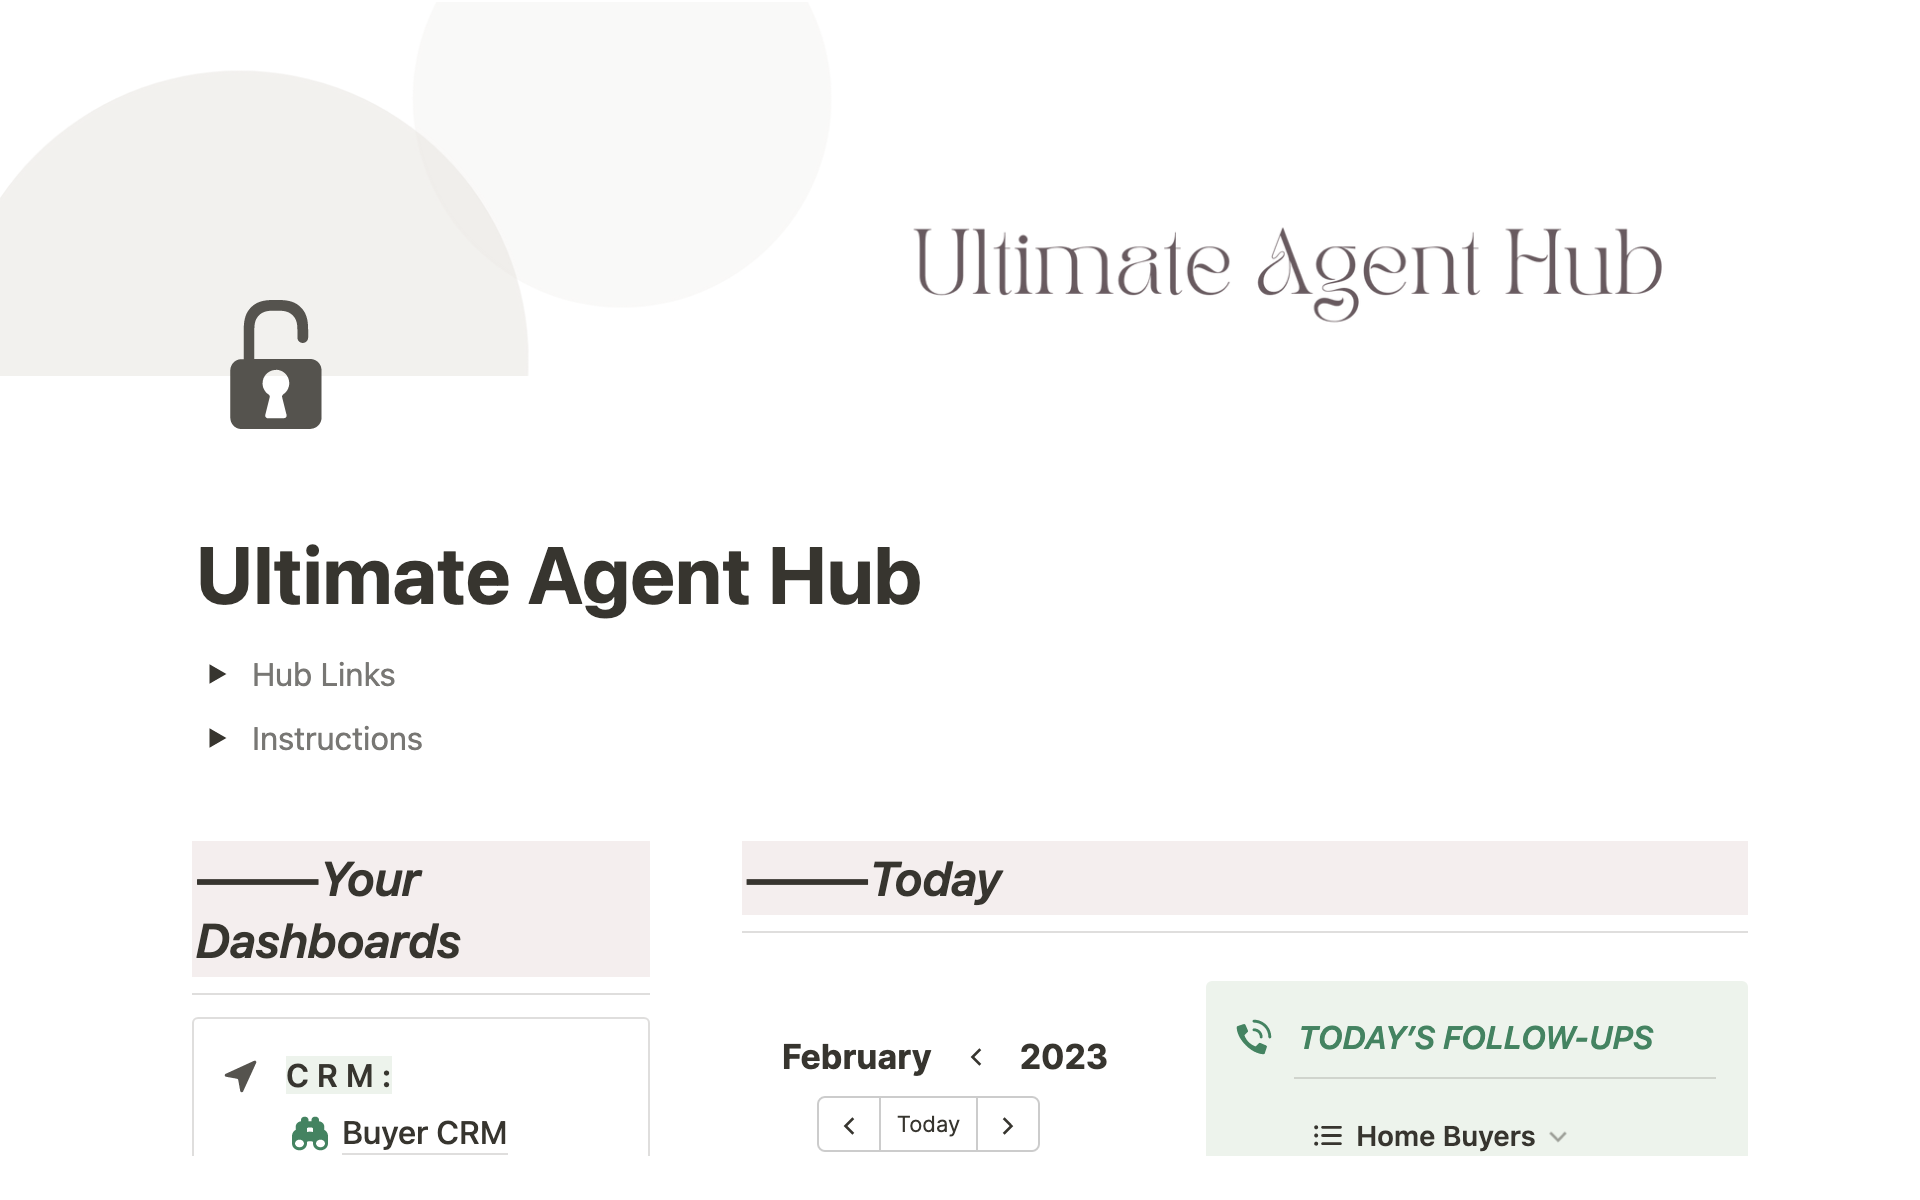 A comprehensive template that helps real estate agents organize their entire business in one place.